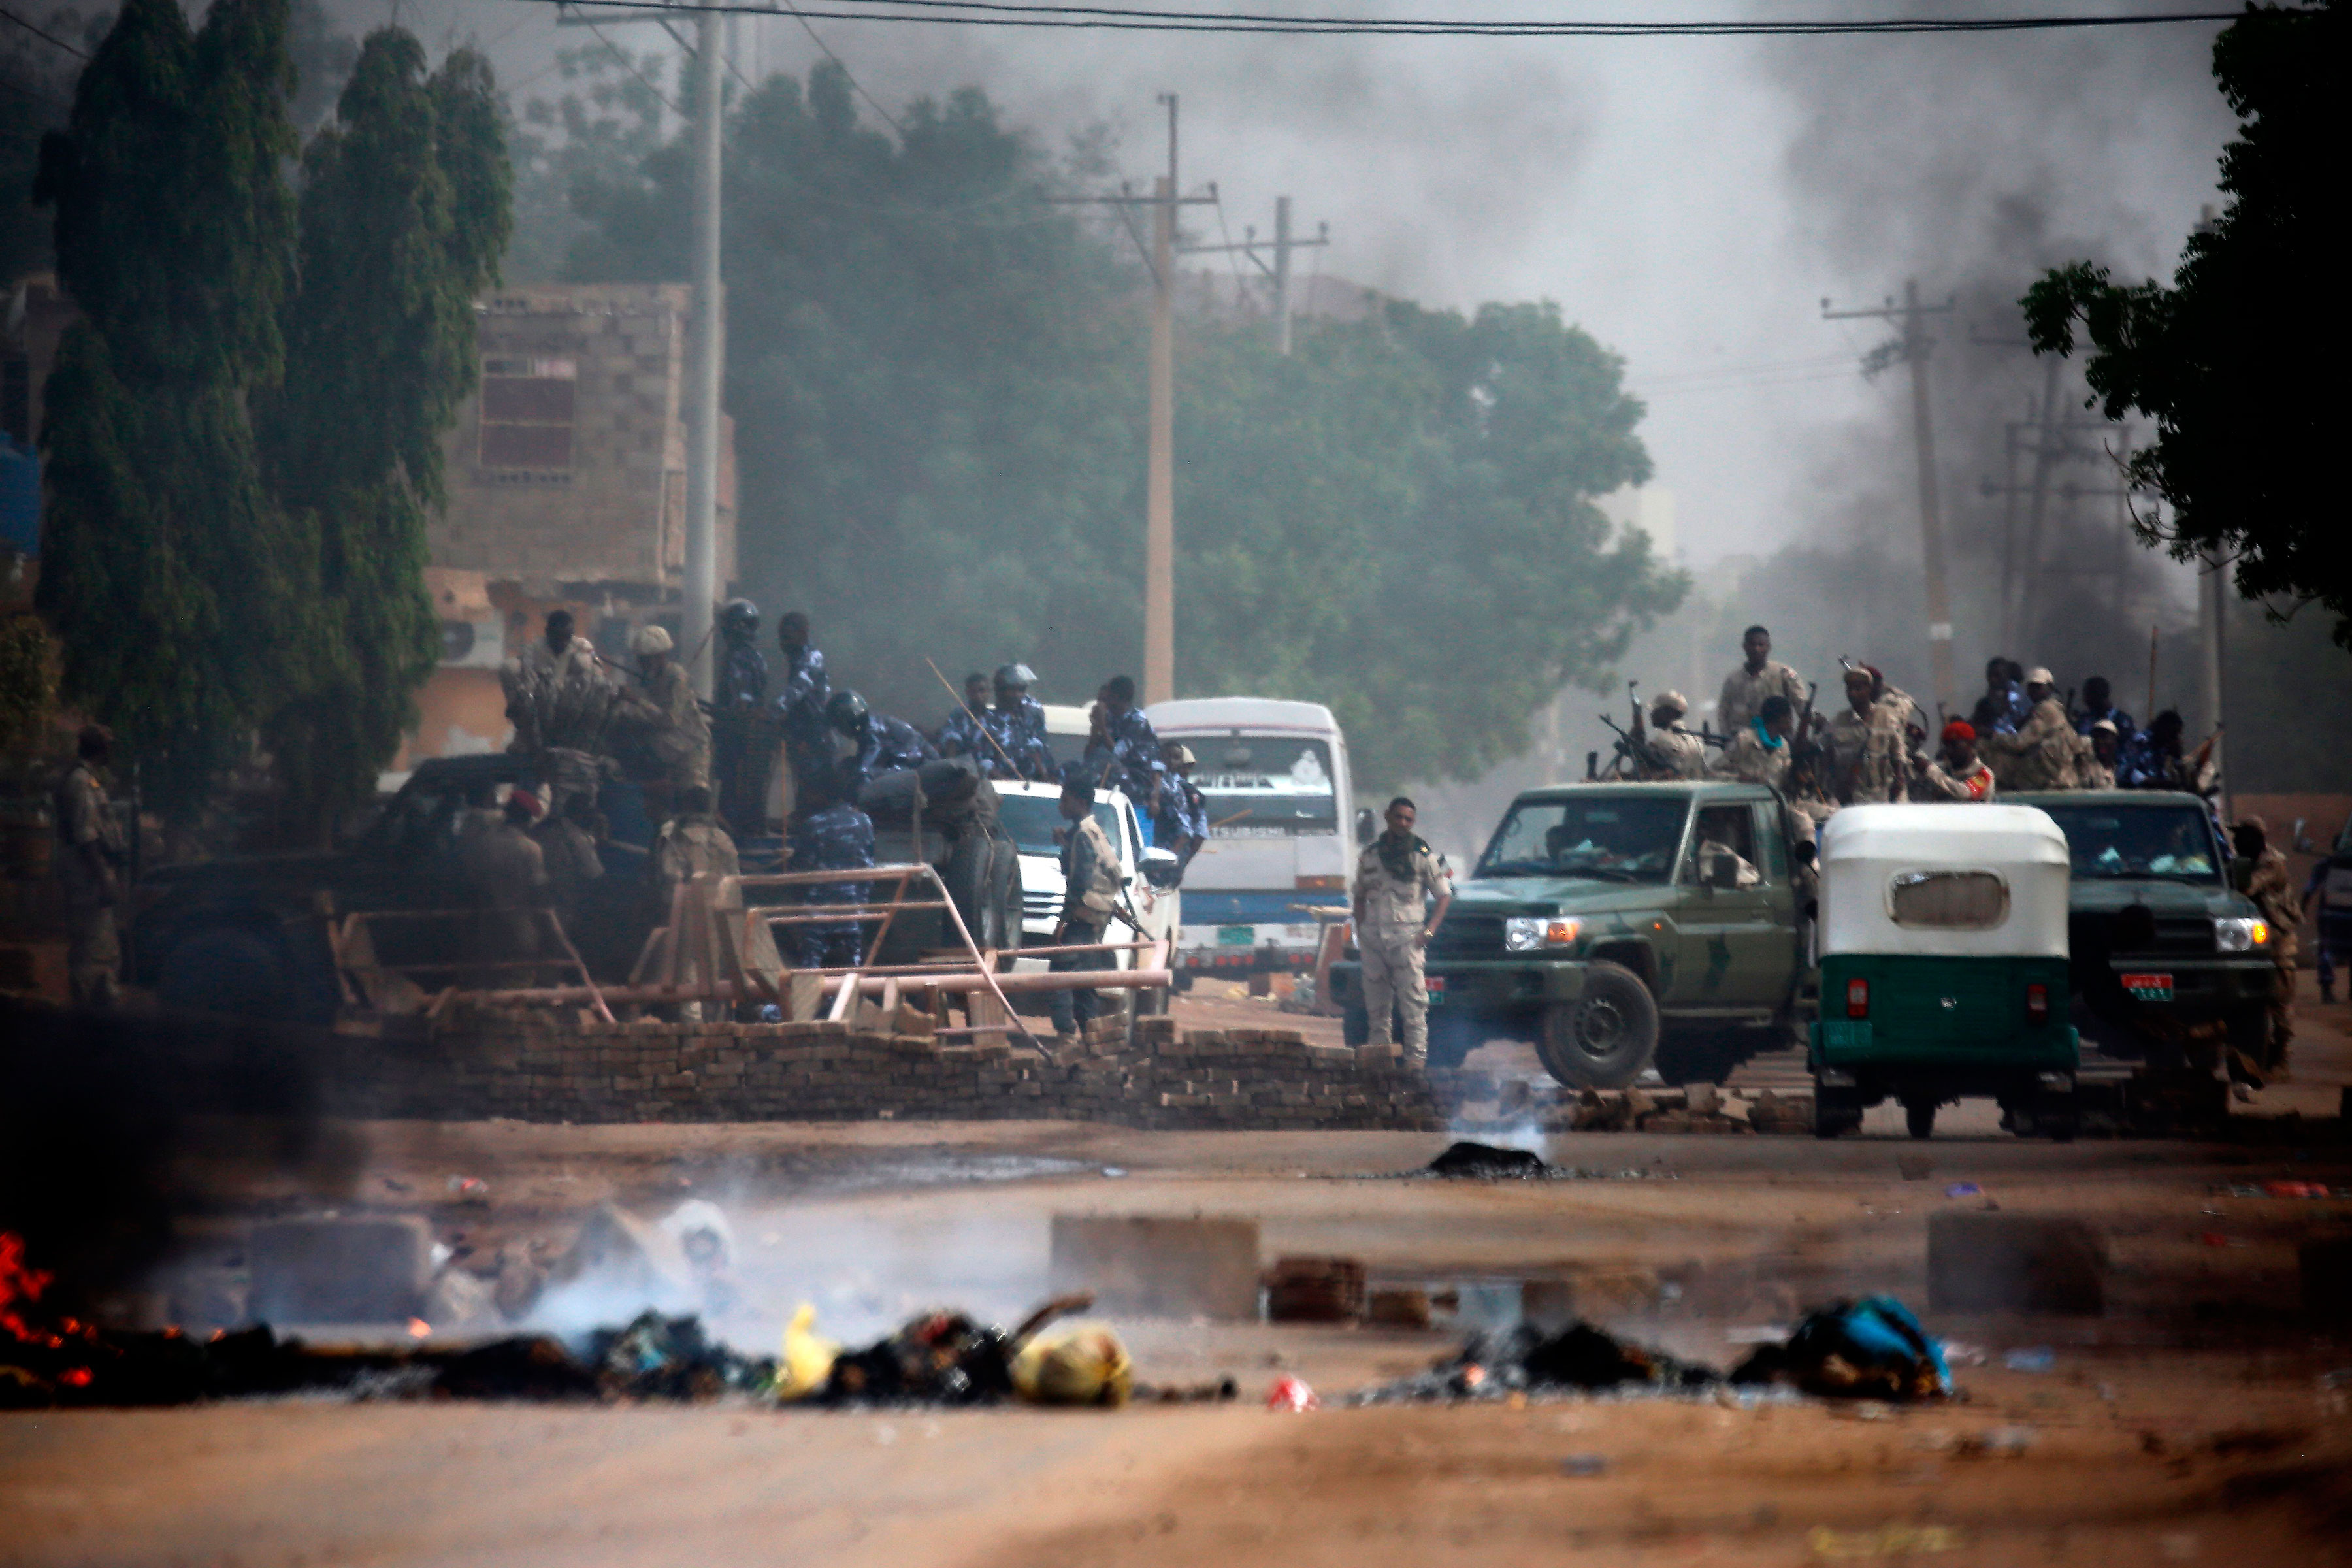 Sudanese forces are deployed around Khartoum's army headquarters as they try to disperse Khartoum's sit-in on June 3, 2019. (Ashraf Shazly—AFP/Getty Images)